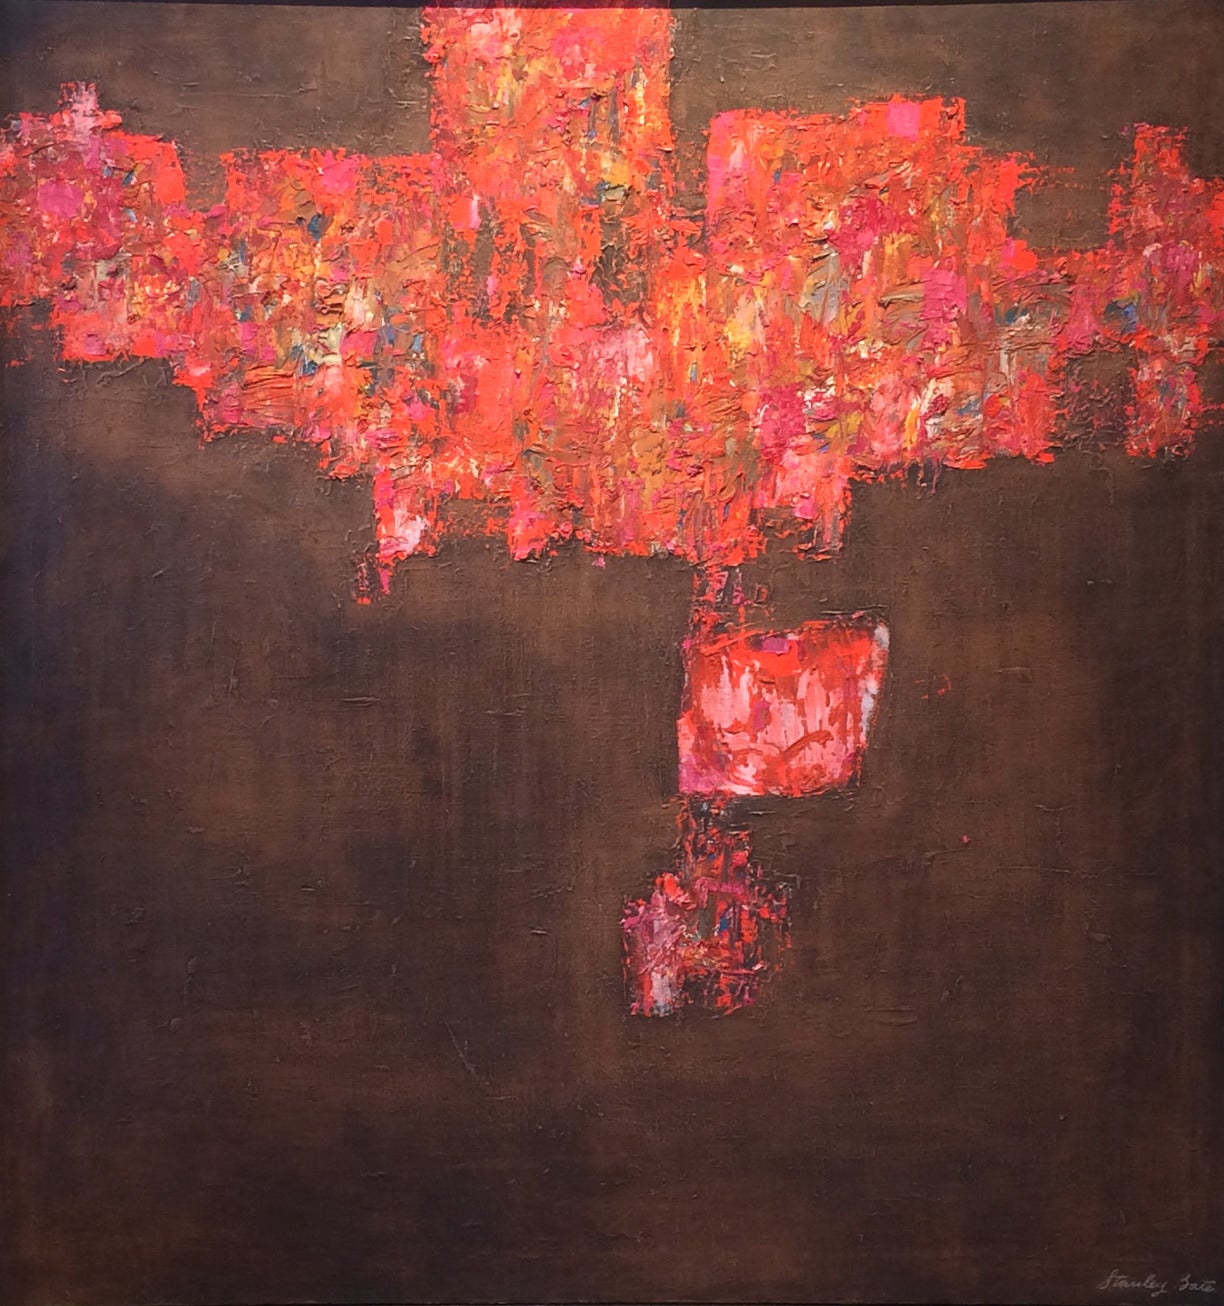 This Modern abstract oil painting on canvas by Stanley Bate is a large, bold piece. It features deep, earthy browns and a very bright red, textured and organic shape that spans the top part of the composition and moves slightly further down it at